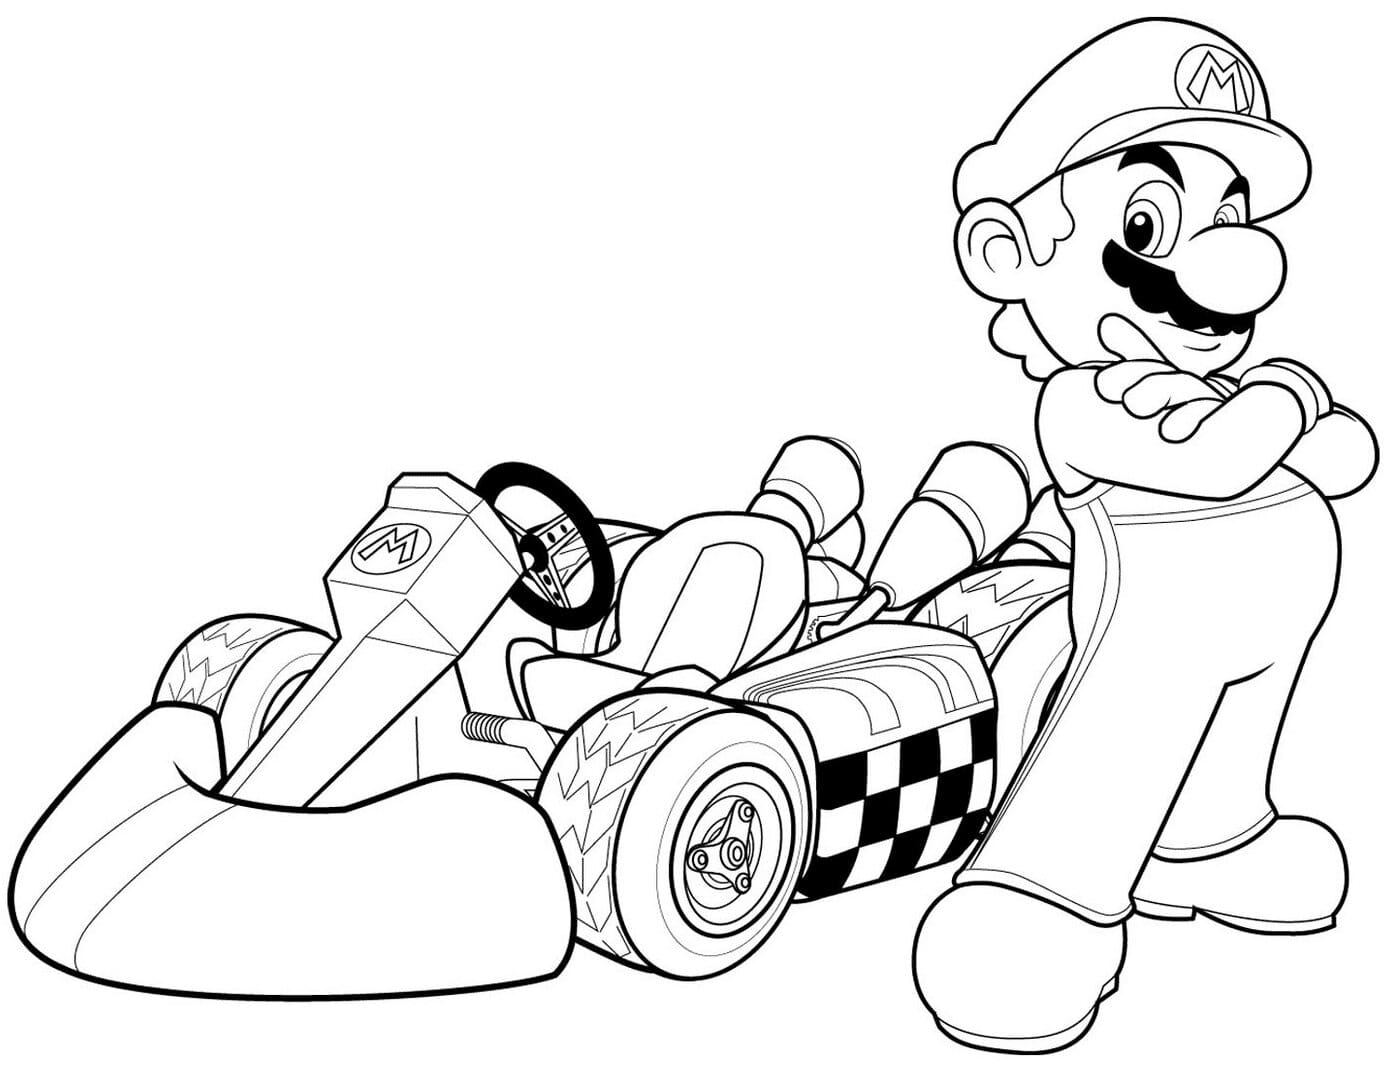 Mario and racing car in Mario Kart Wii Coloring Page